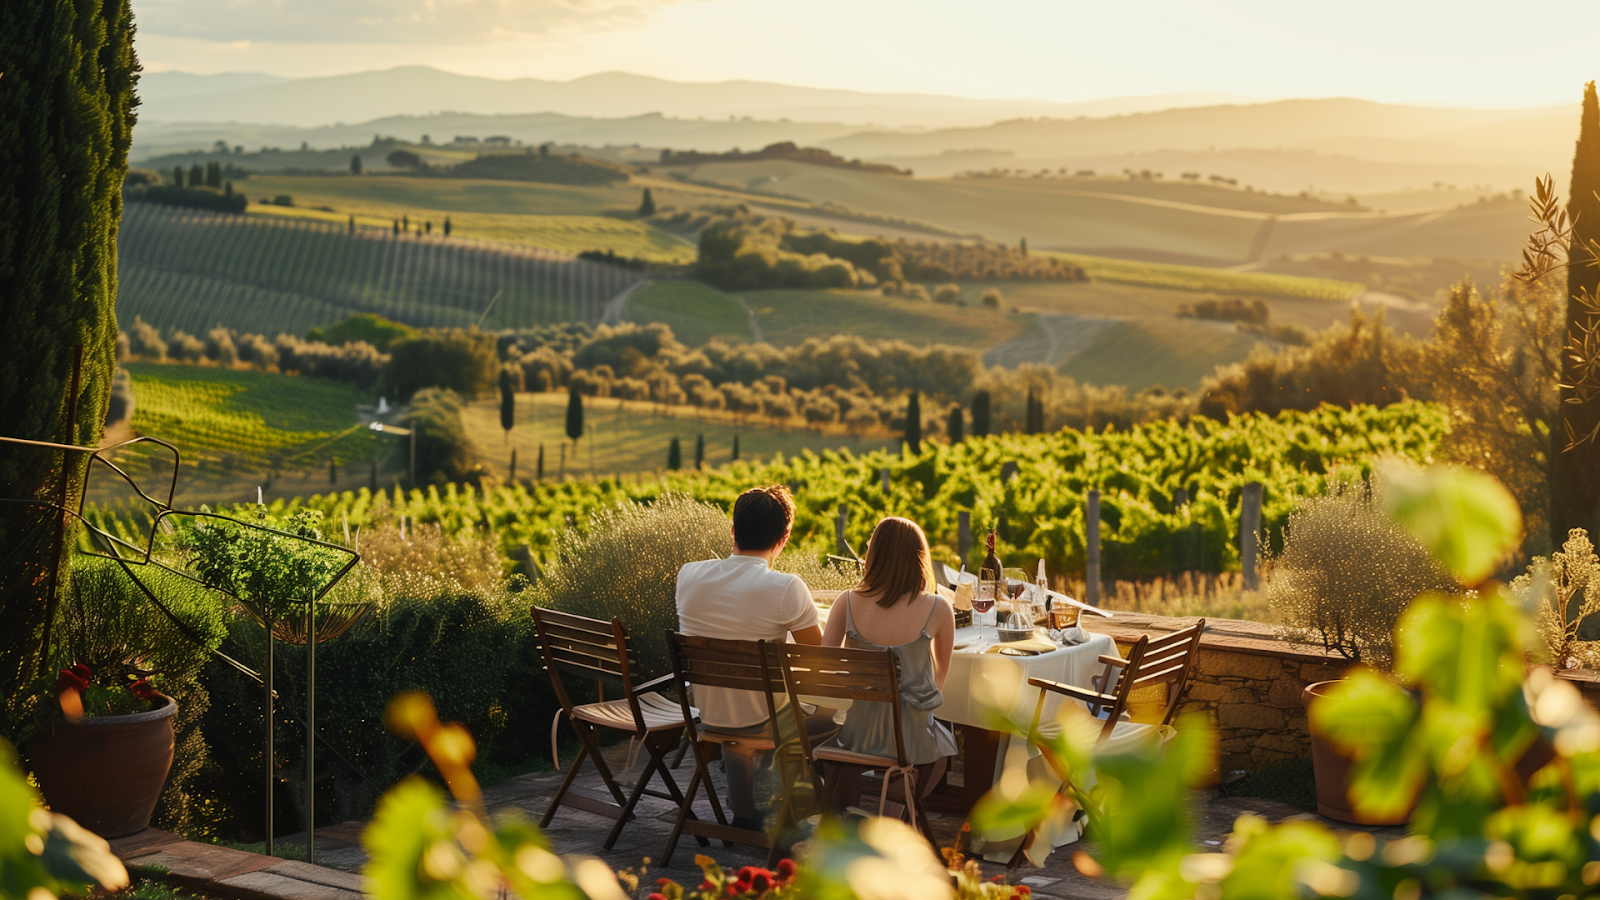 Couple enjoying a private dinner on their villa's terrace in Tuscany, Italy.